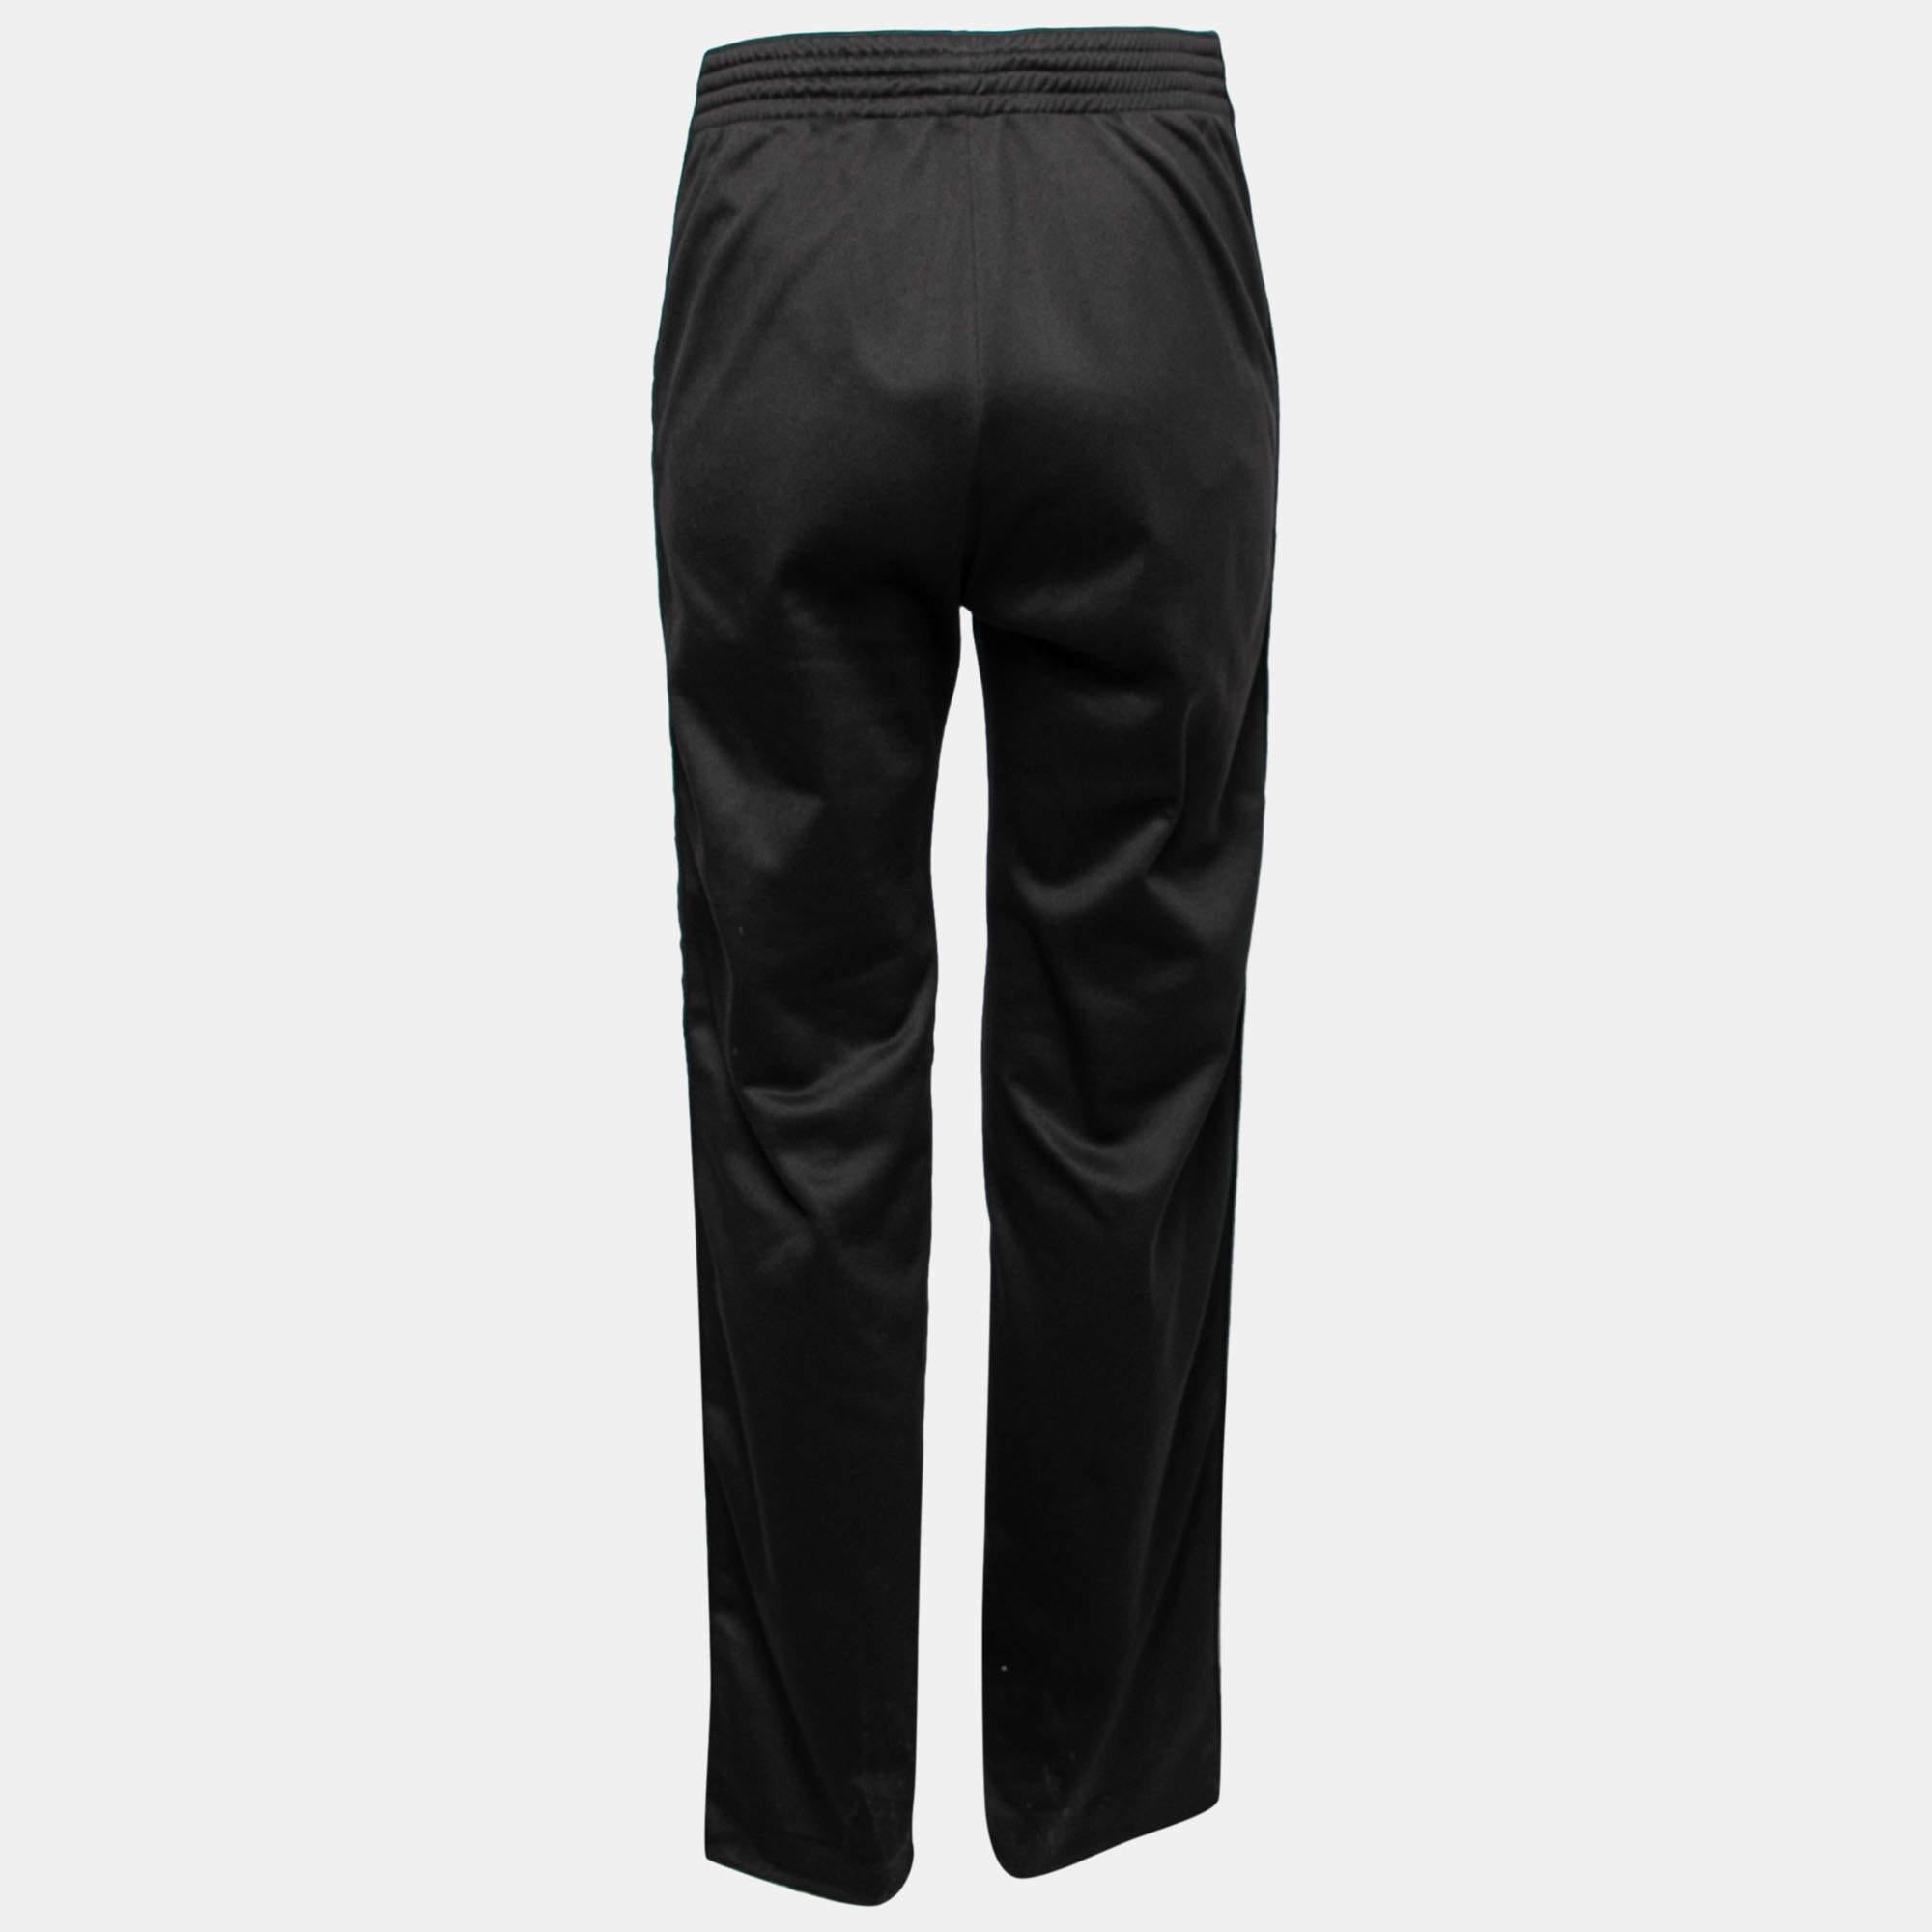 Spend the day comfortably and stylishly with these joggers from the House of Givenchy. They are made from black jersey fabric, with logo tape trims detailing the sides. They have two external pockets. Add these classy joggers to your collection